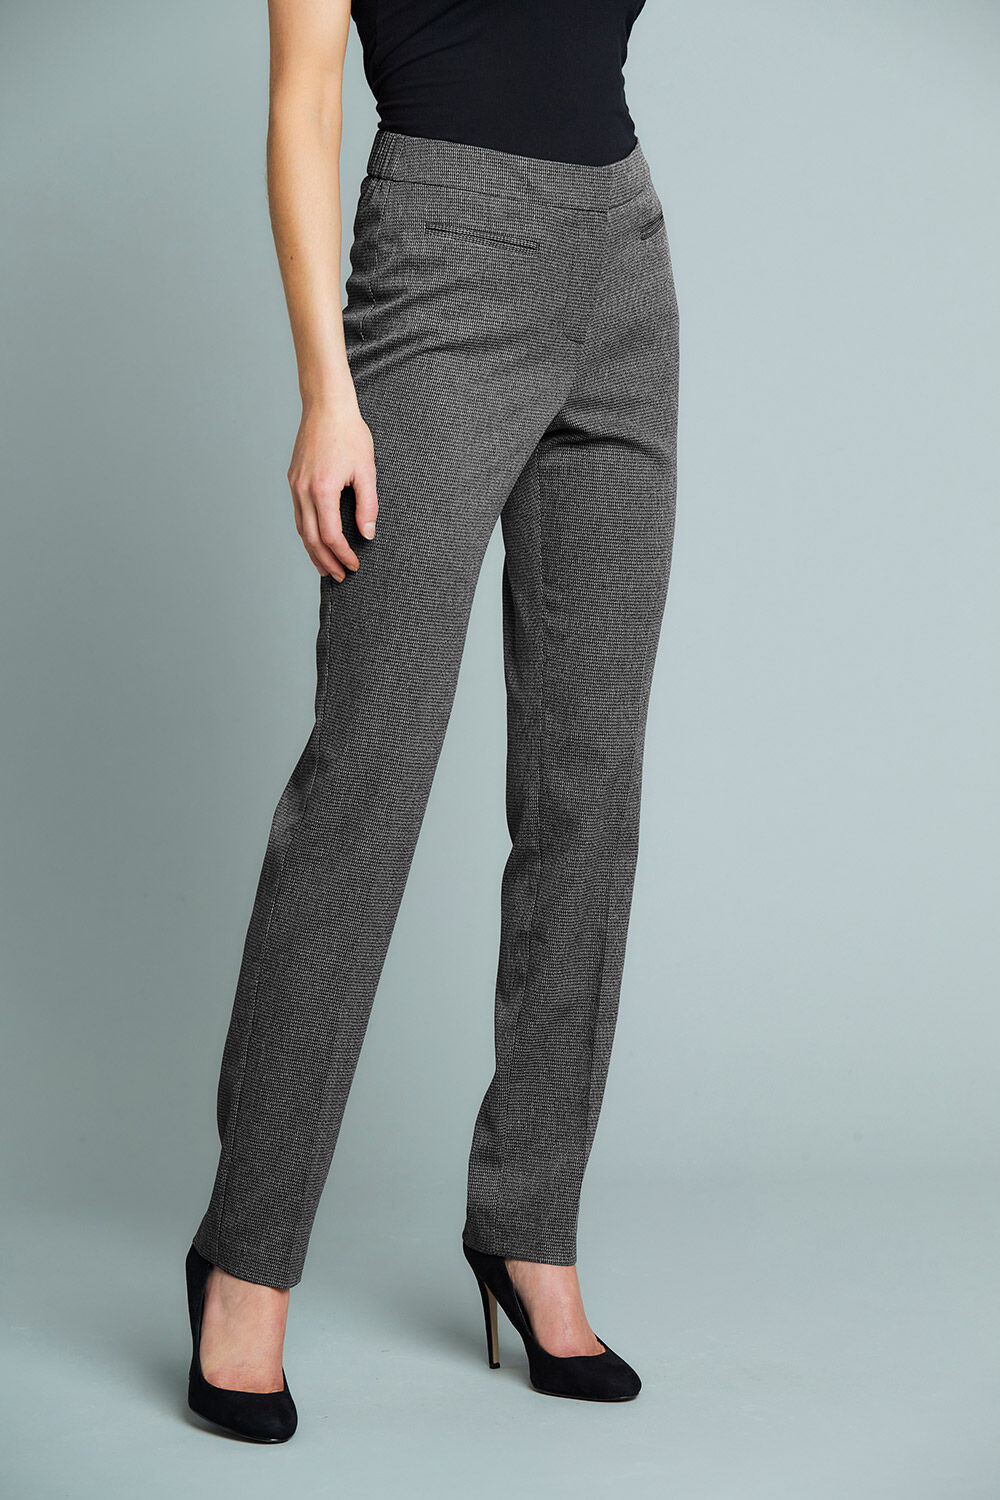 Buy Wide Leg Stretch Trousers  Home Delivery  Bonmarché